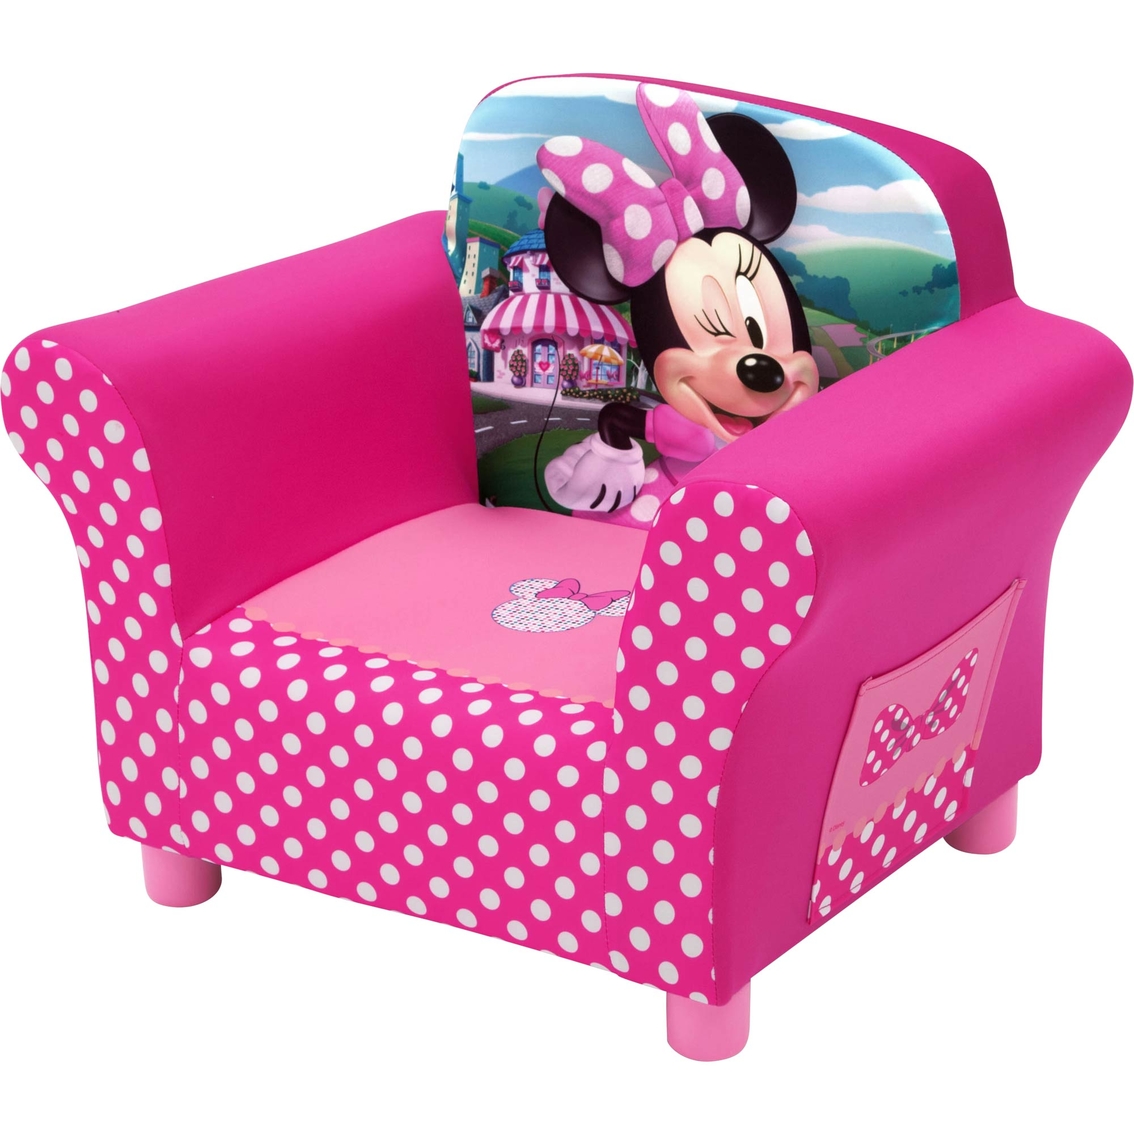 Disney Minnie Mouse Upholstered Chair - Image 3 of 4